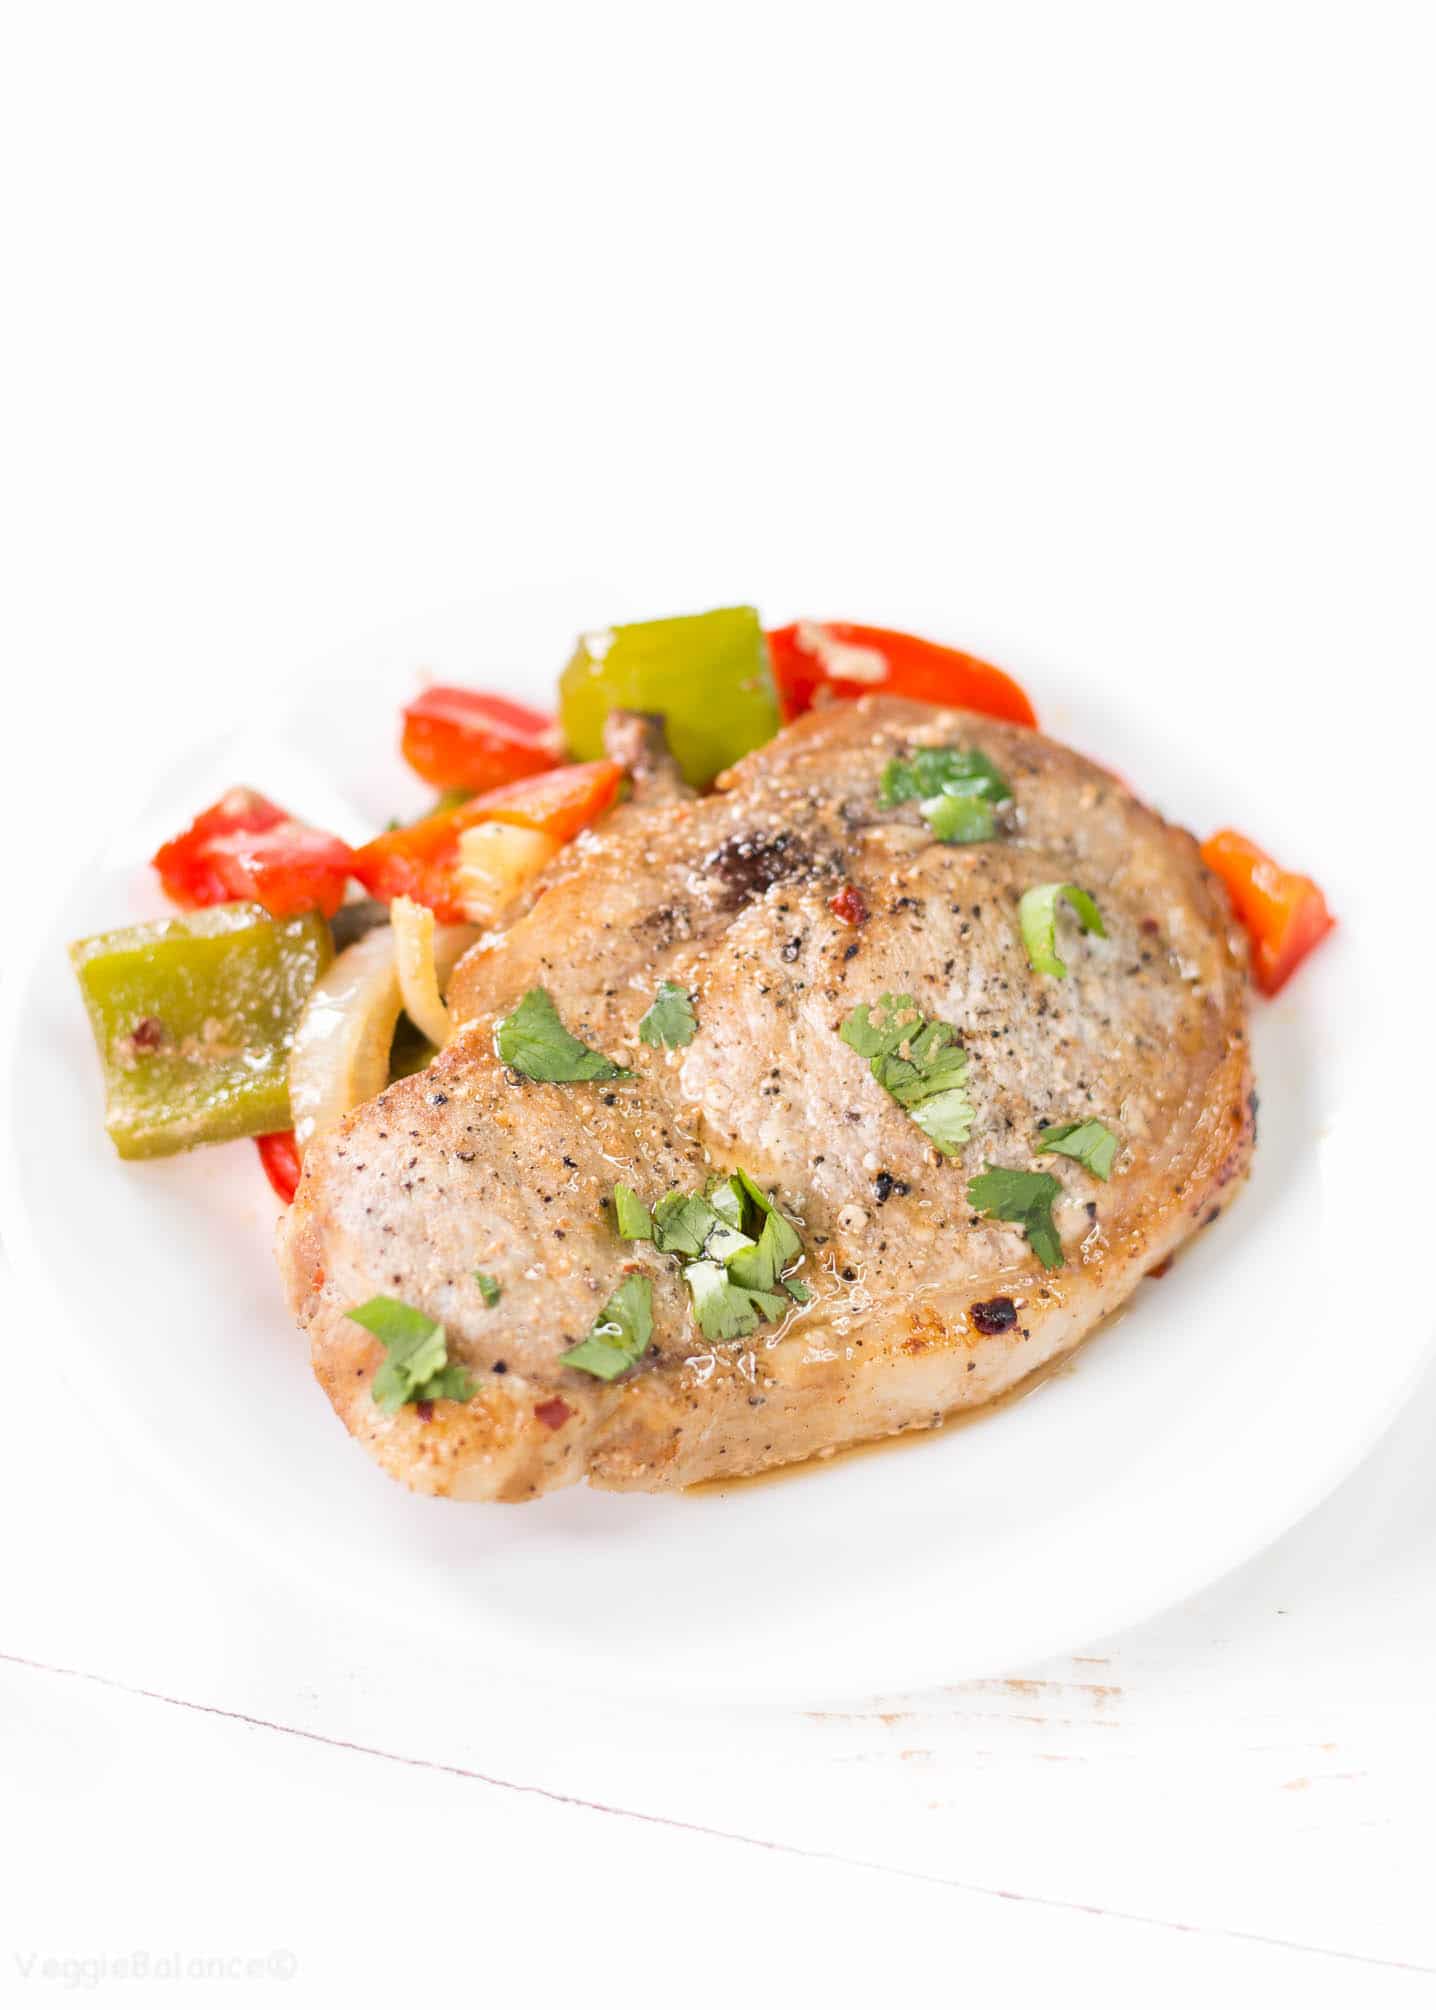 Oven Baked Pork Chops Smothered in Peppers